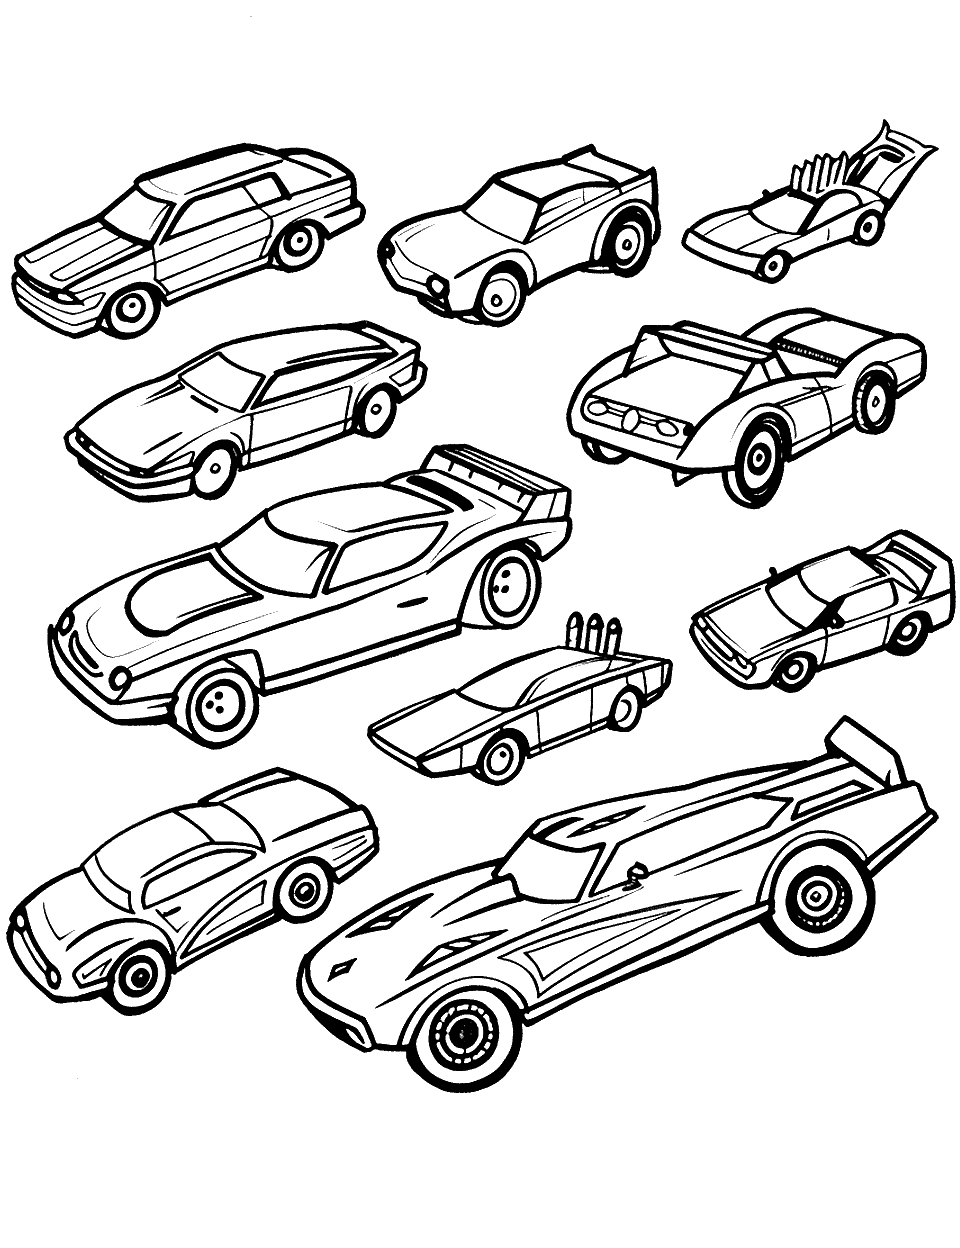 Toy Car Collection Coloring Page - A child’s toy car collection spread out, featuring various Hot Wheels models.